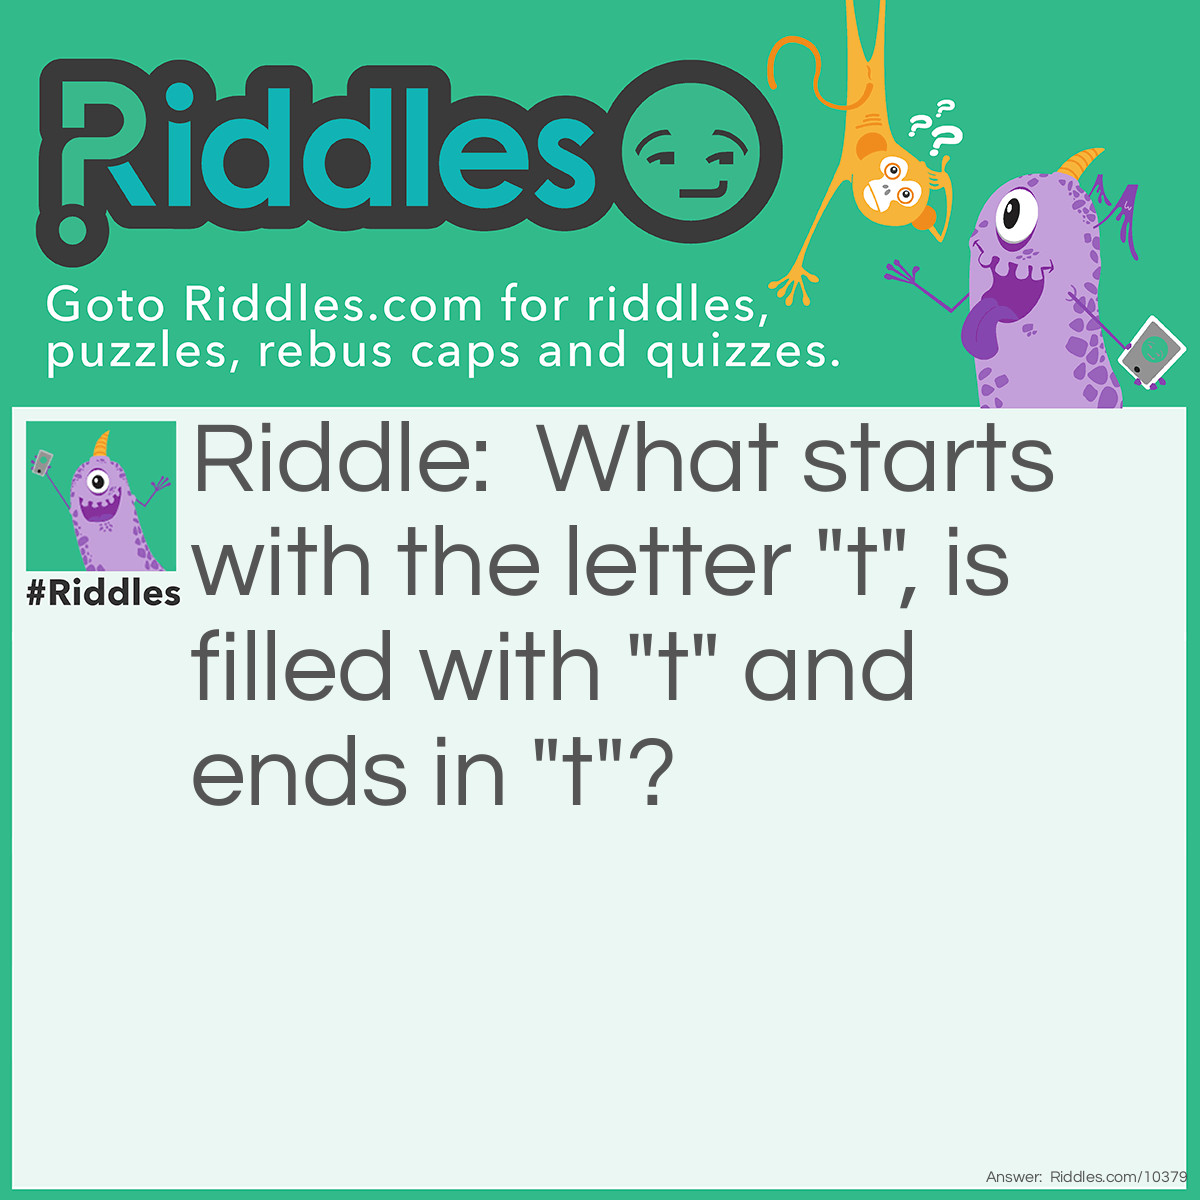 Riddle: What starts with the letter "t", is filled with "t" and ends in "t"? Answer: A teapot.